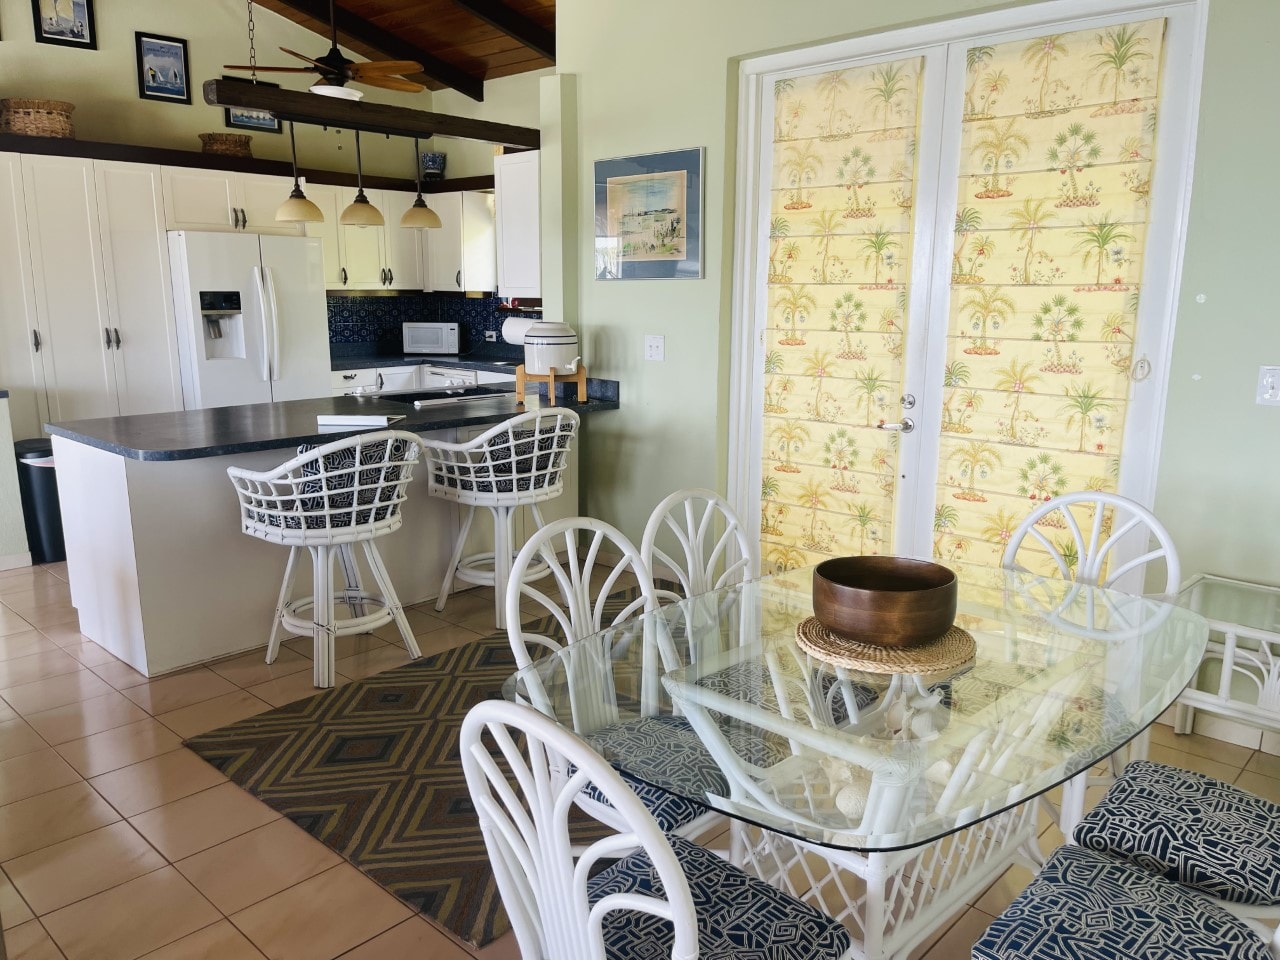 Property Image 2 - Welcome to Villa Sunrise! 3 bedrooms, 3 Baths, Private Pool! Located on the East End of St. Croix!